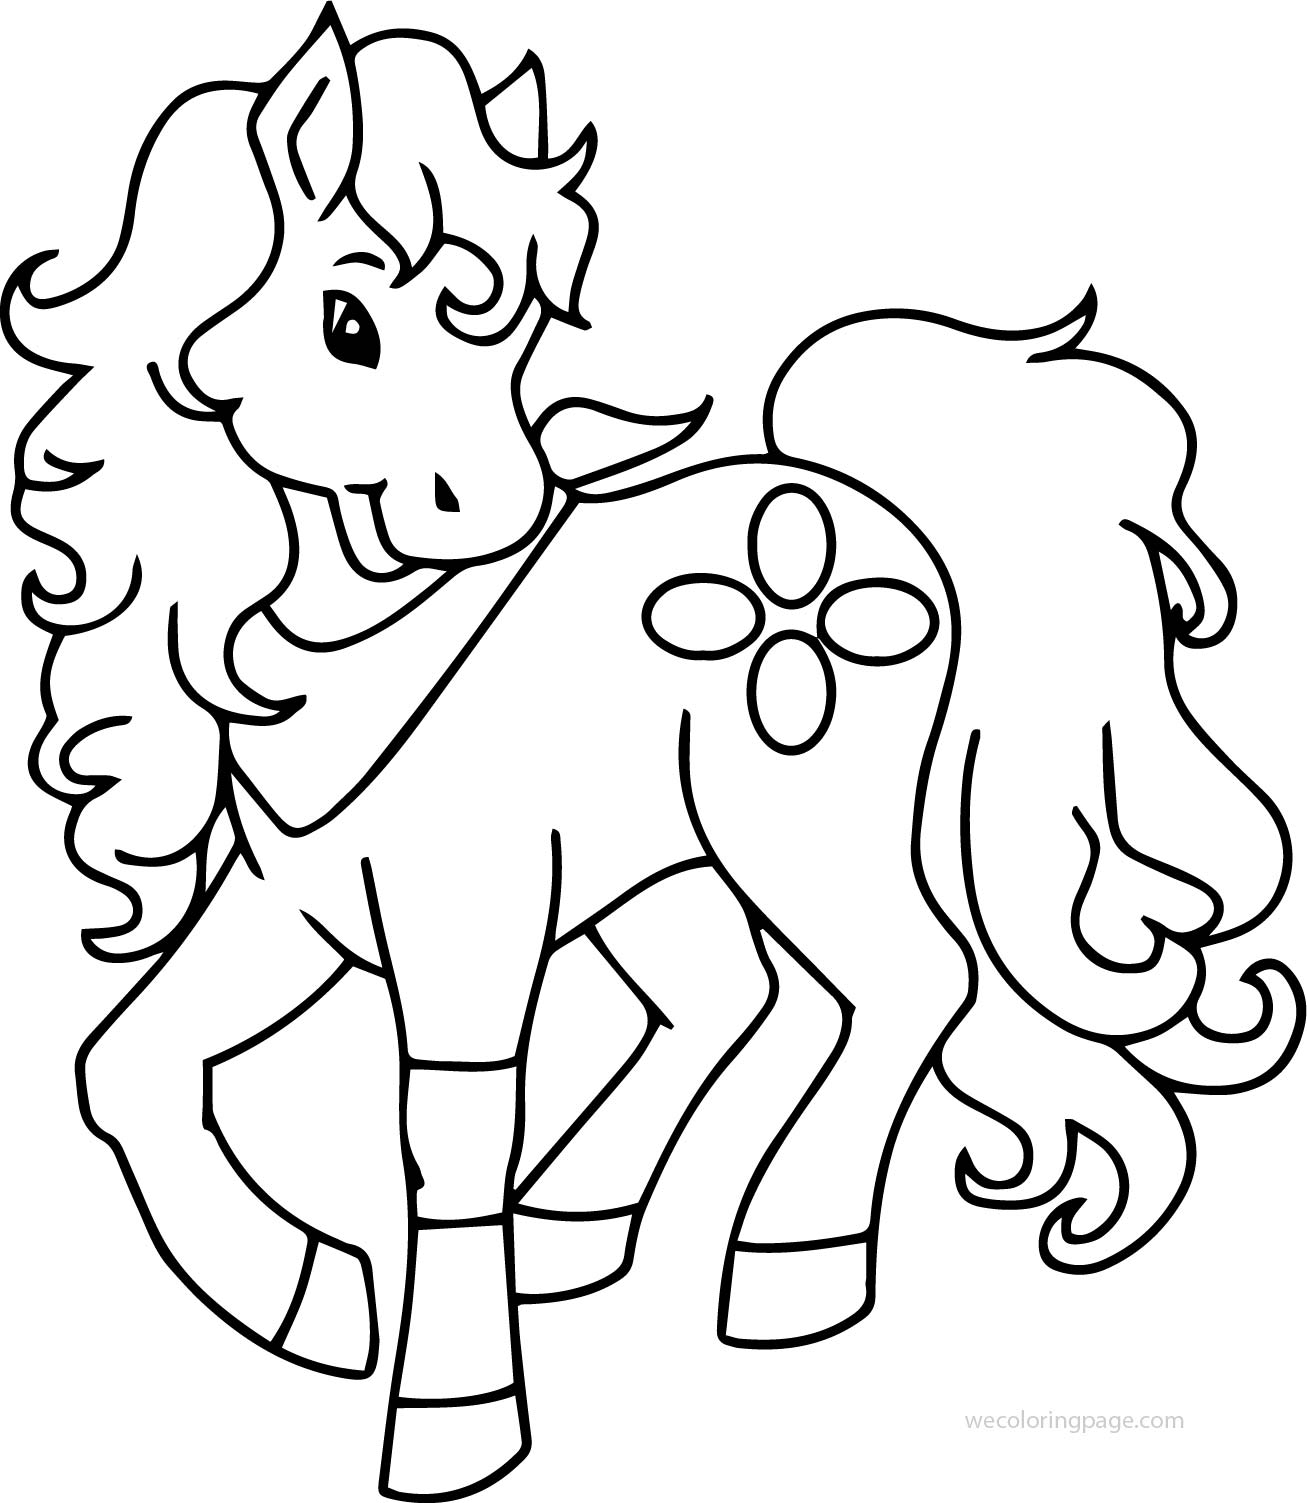  Download Free Coloring Pages   9